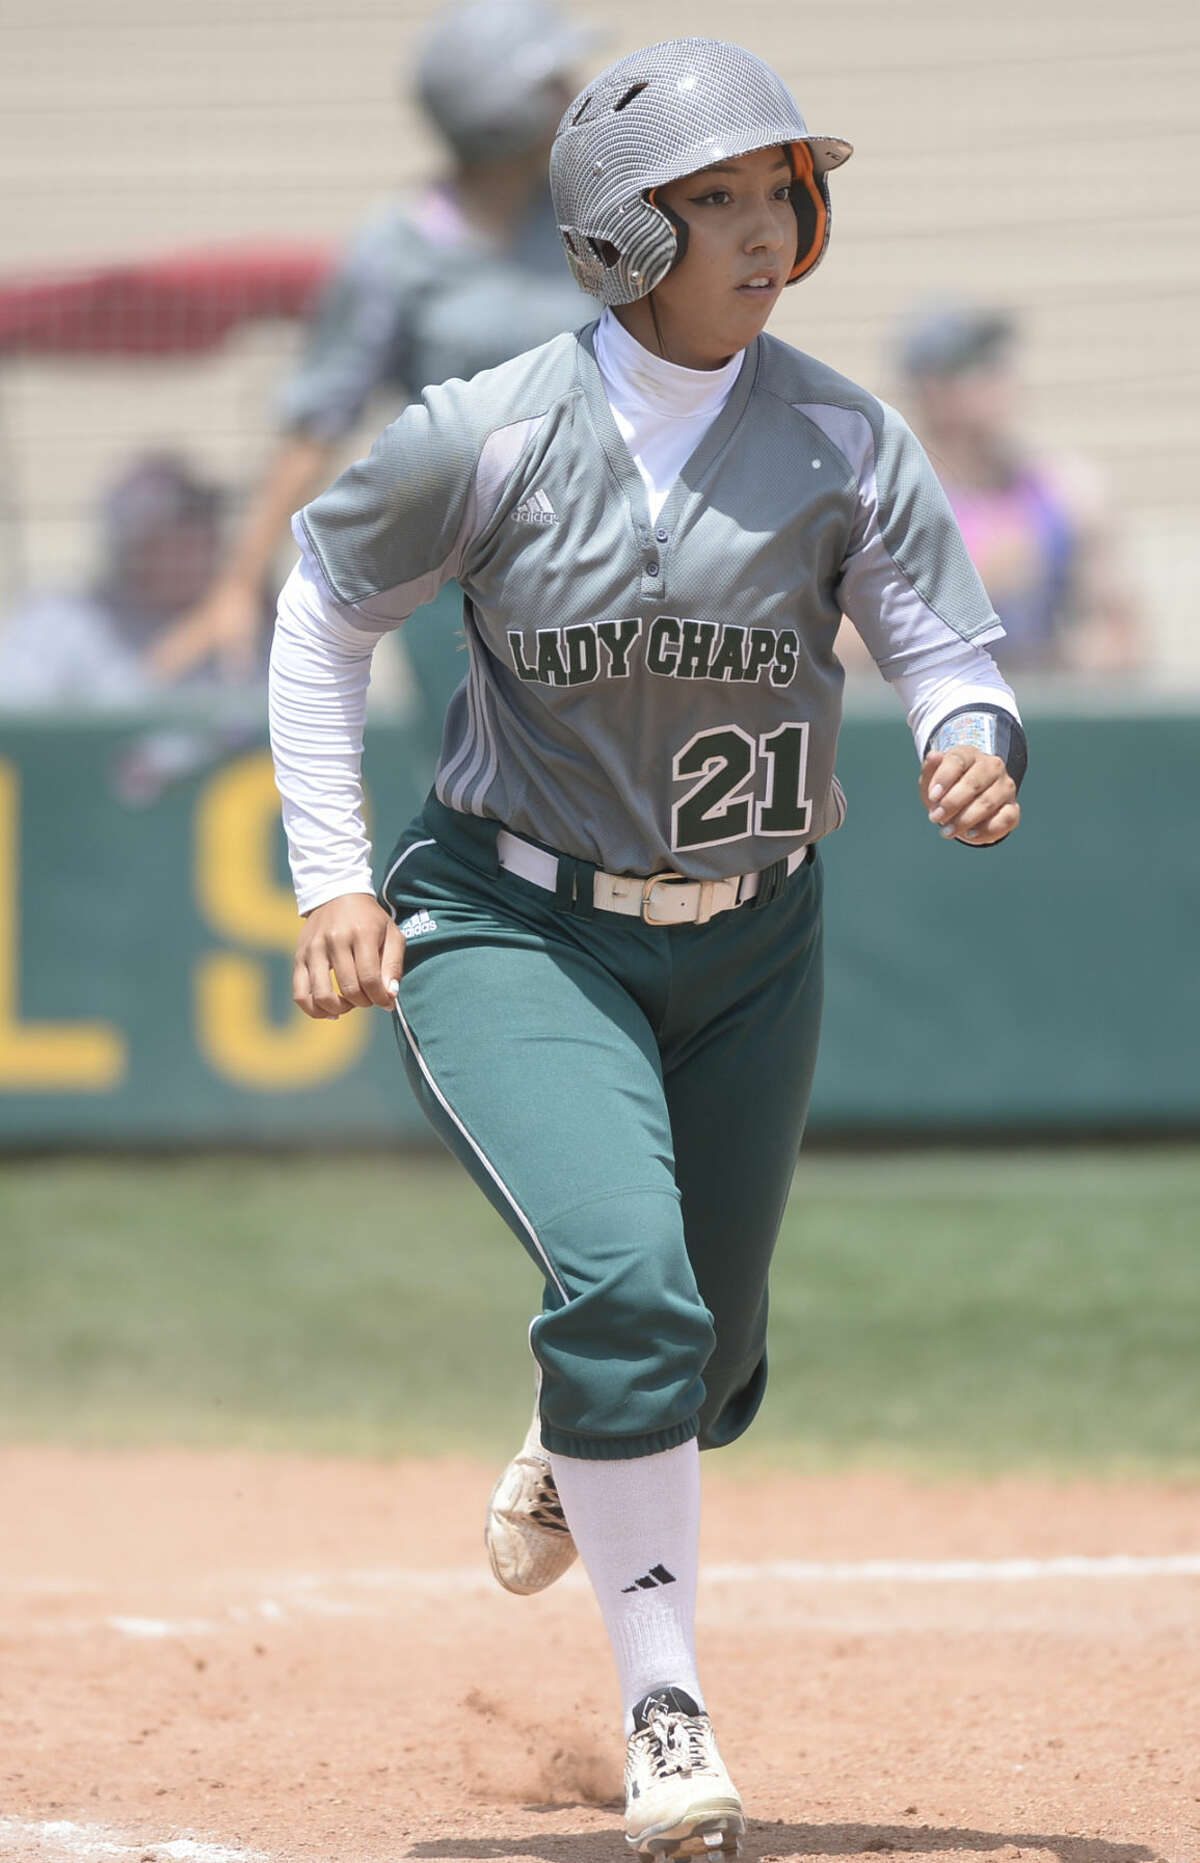 Midland College's Alexis Sullivan-Aguilar (21) runs to first base after hitting a home run against Clarendon on Saturday, April 16, 2016, at Midland College. James Durbin/Reporter-Telegram